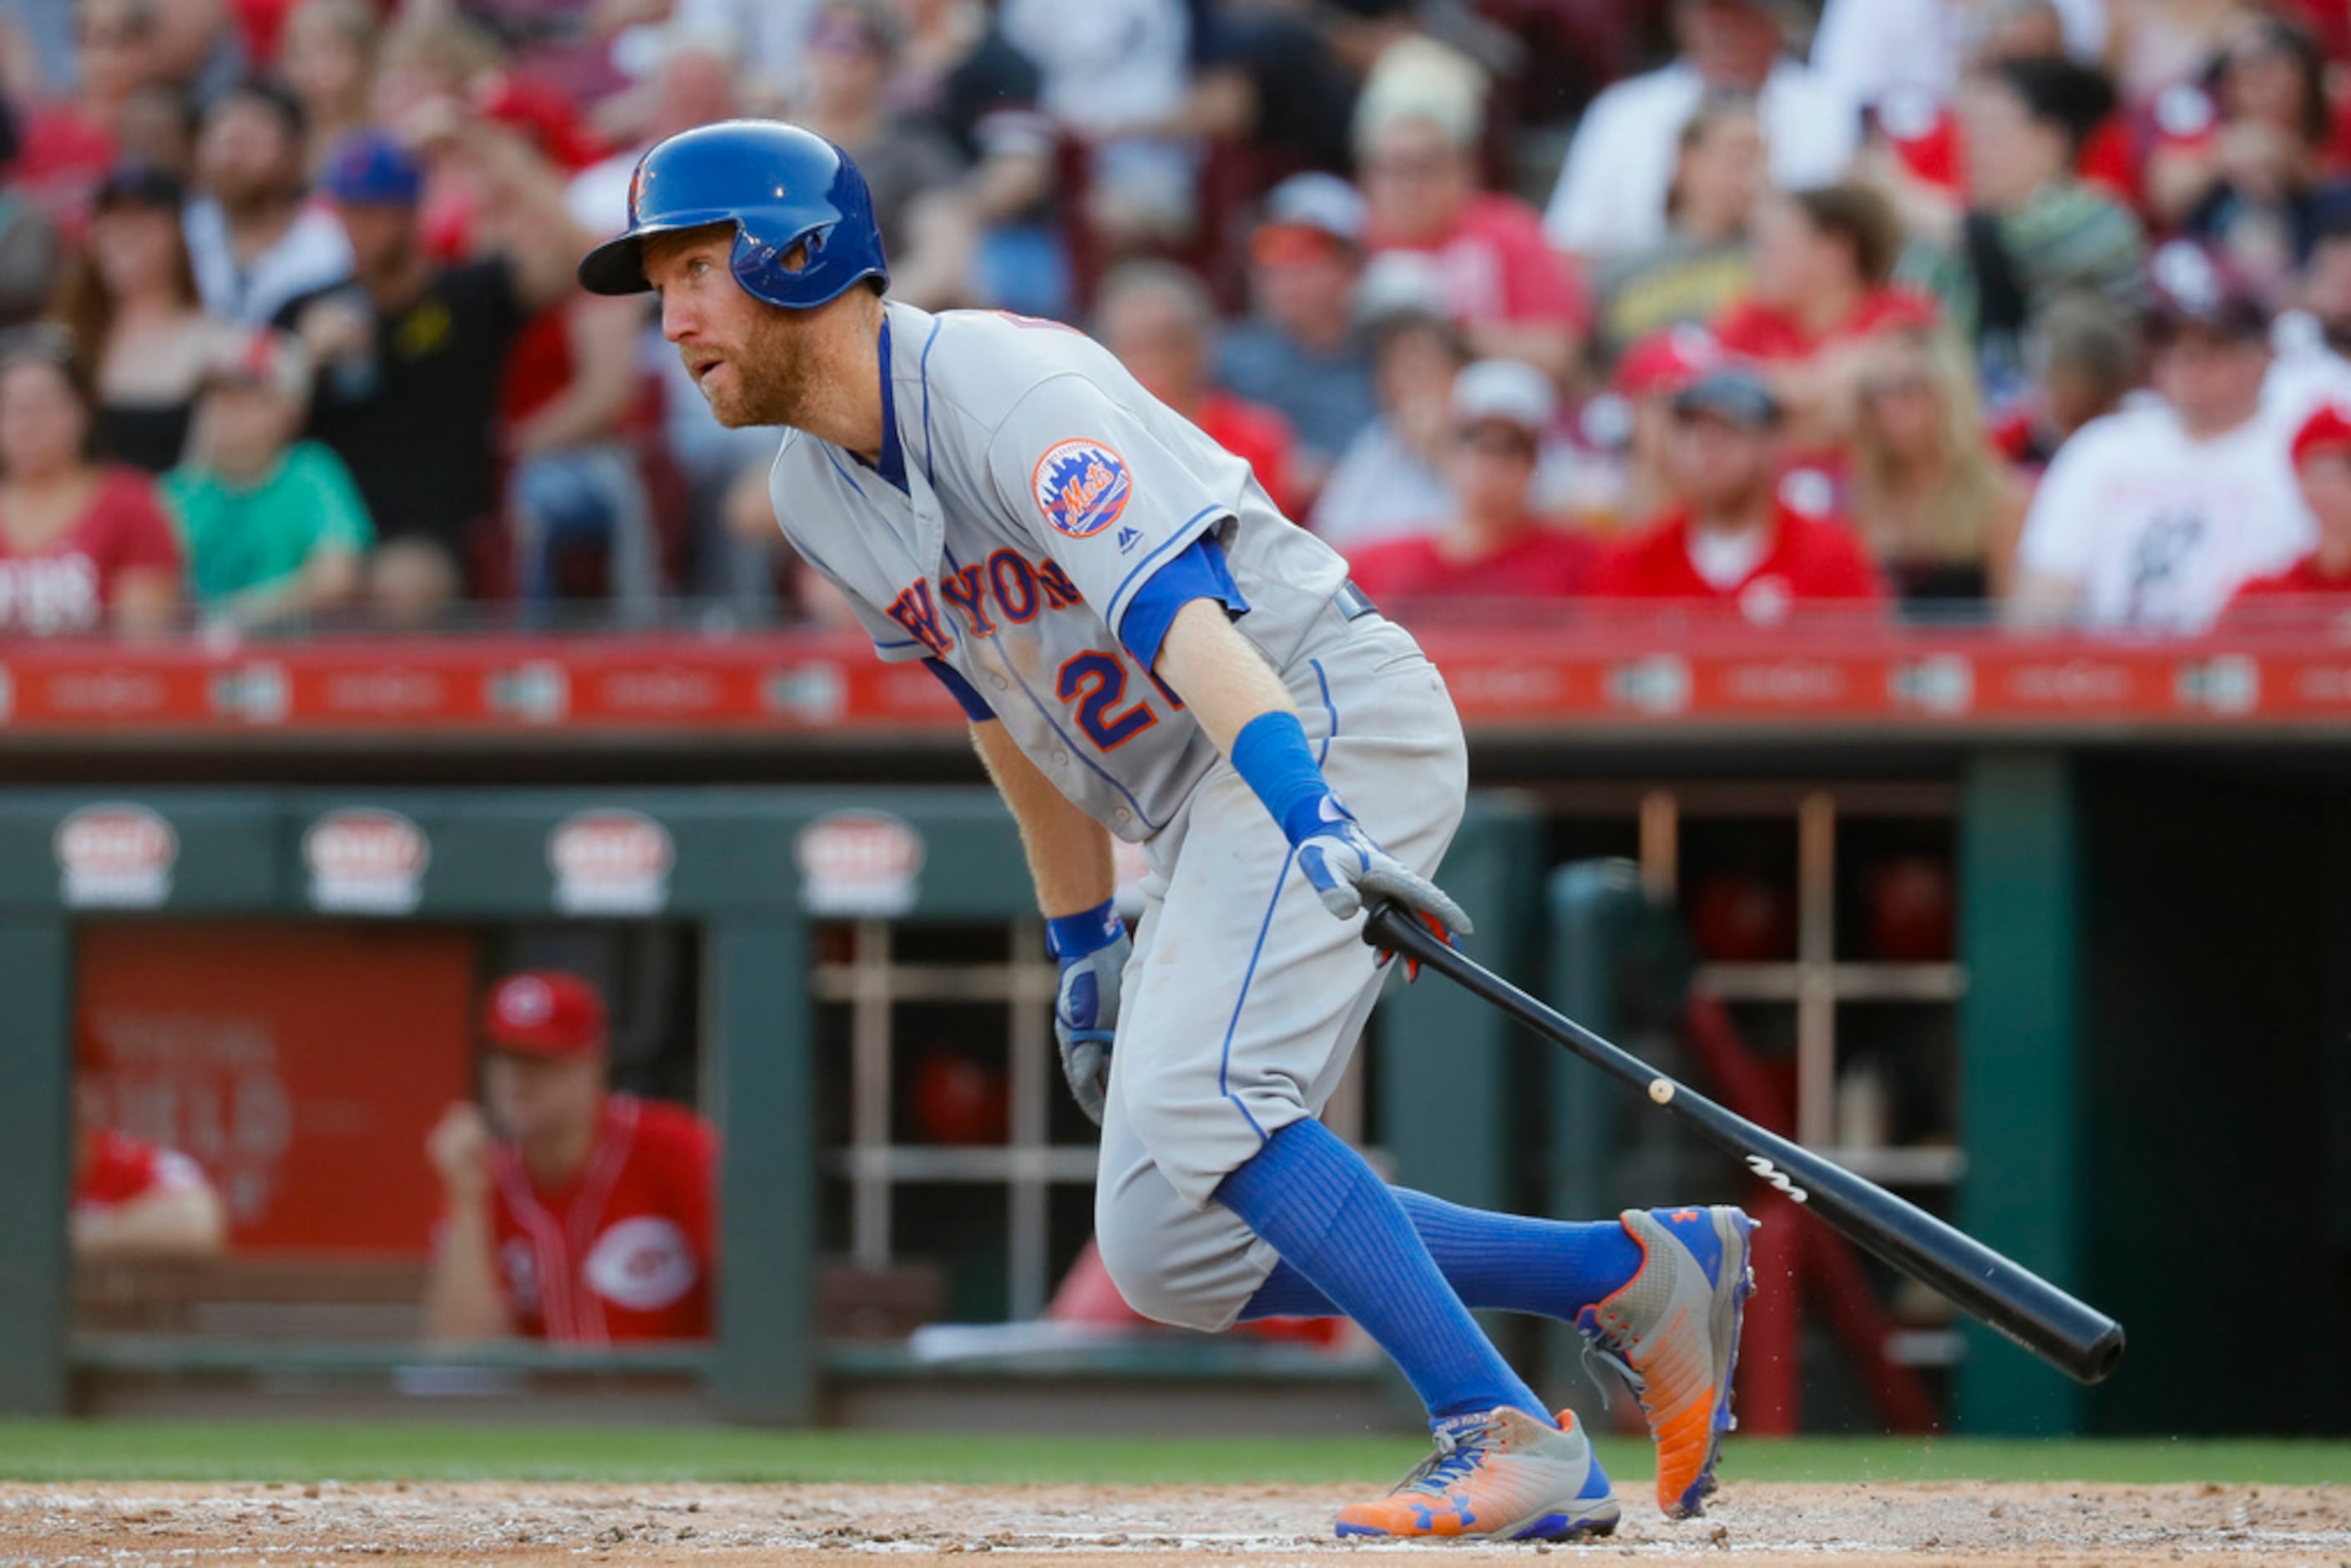 10 things to know about Rangers 3B Todd Frazier, from his Little